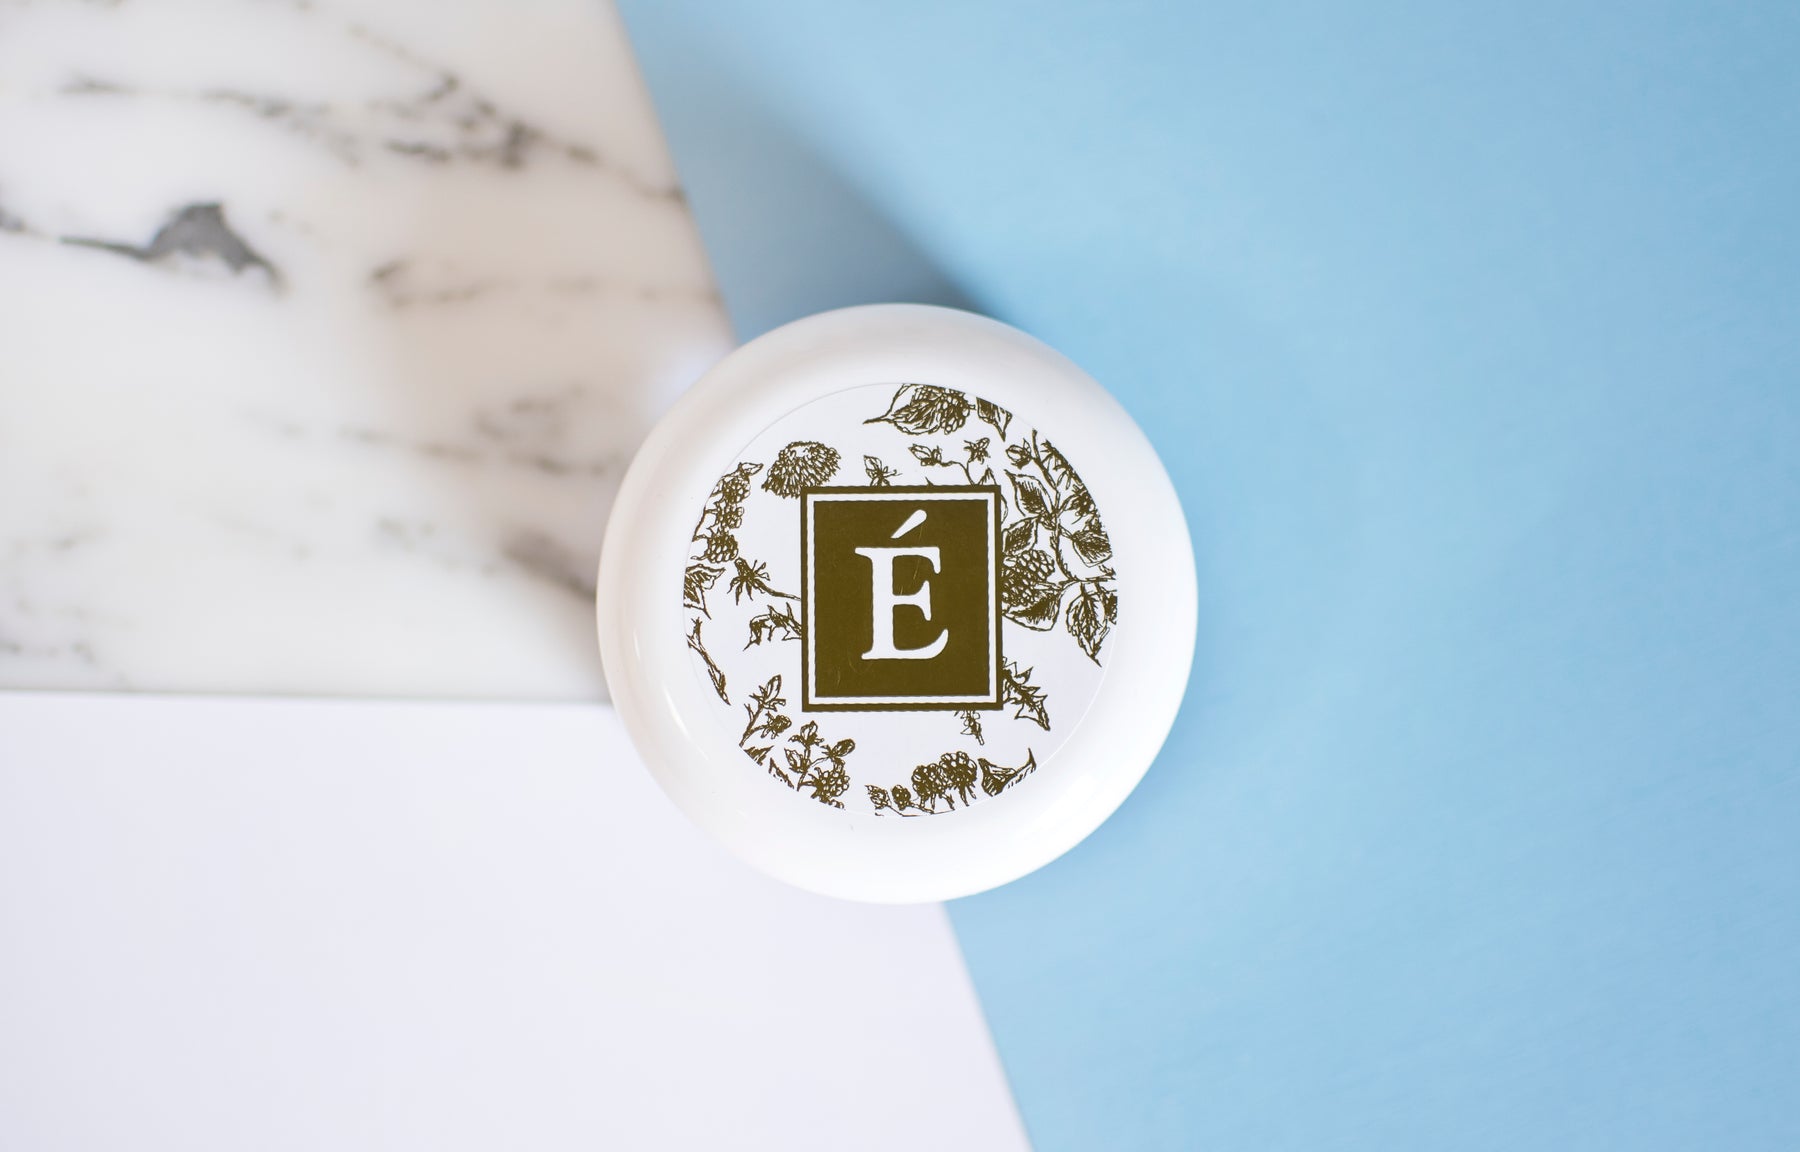 Eminence Organics moisturizer with logo on lid with white and blue background